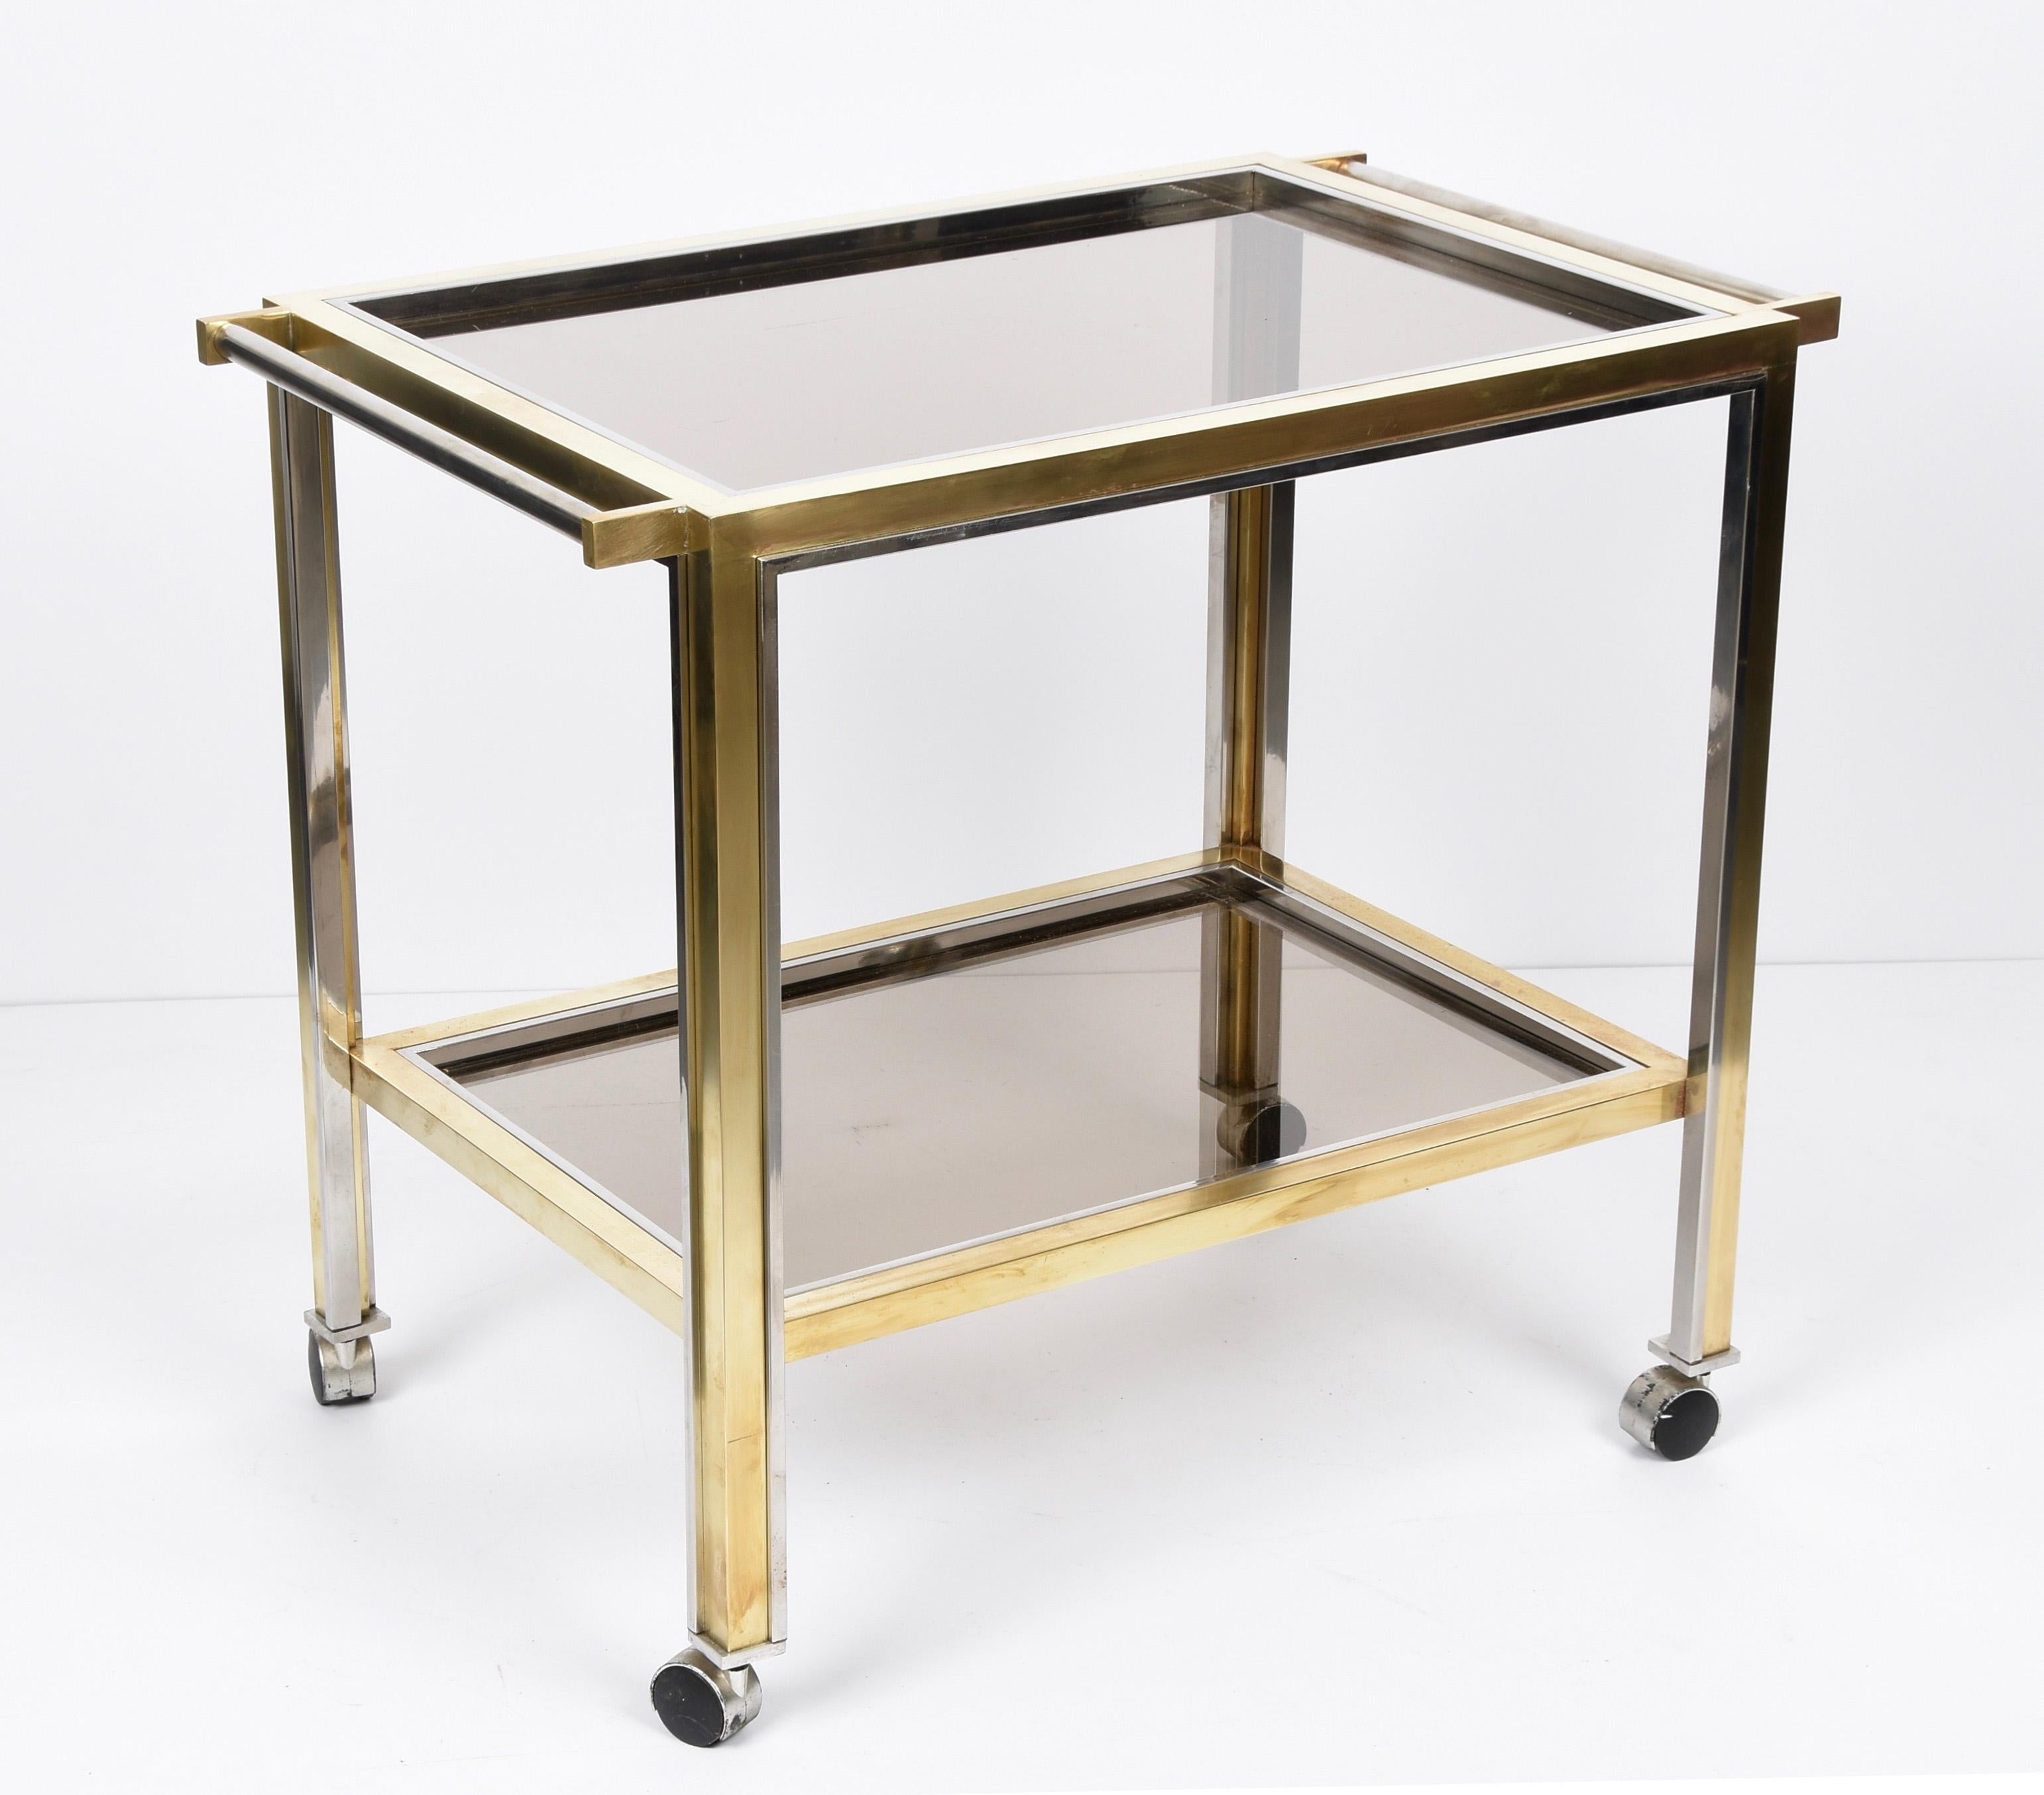 Rega Style Midcentury Brass and Chrome Italian Bar Cart with Glass Shelves 1970s For Sale 4